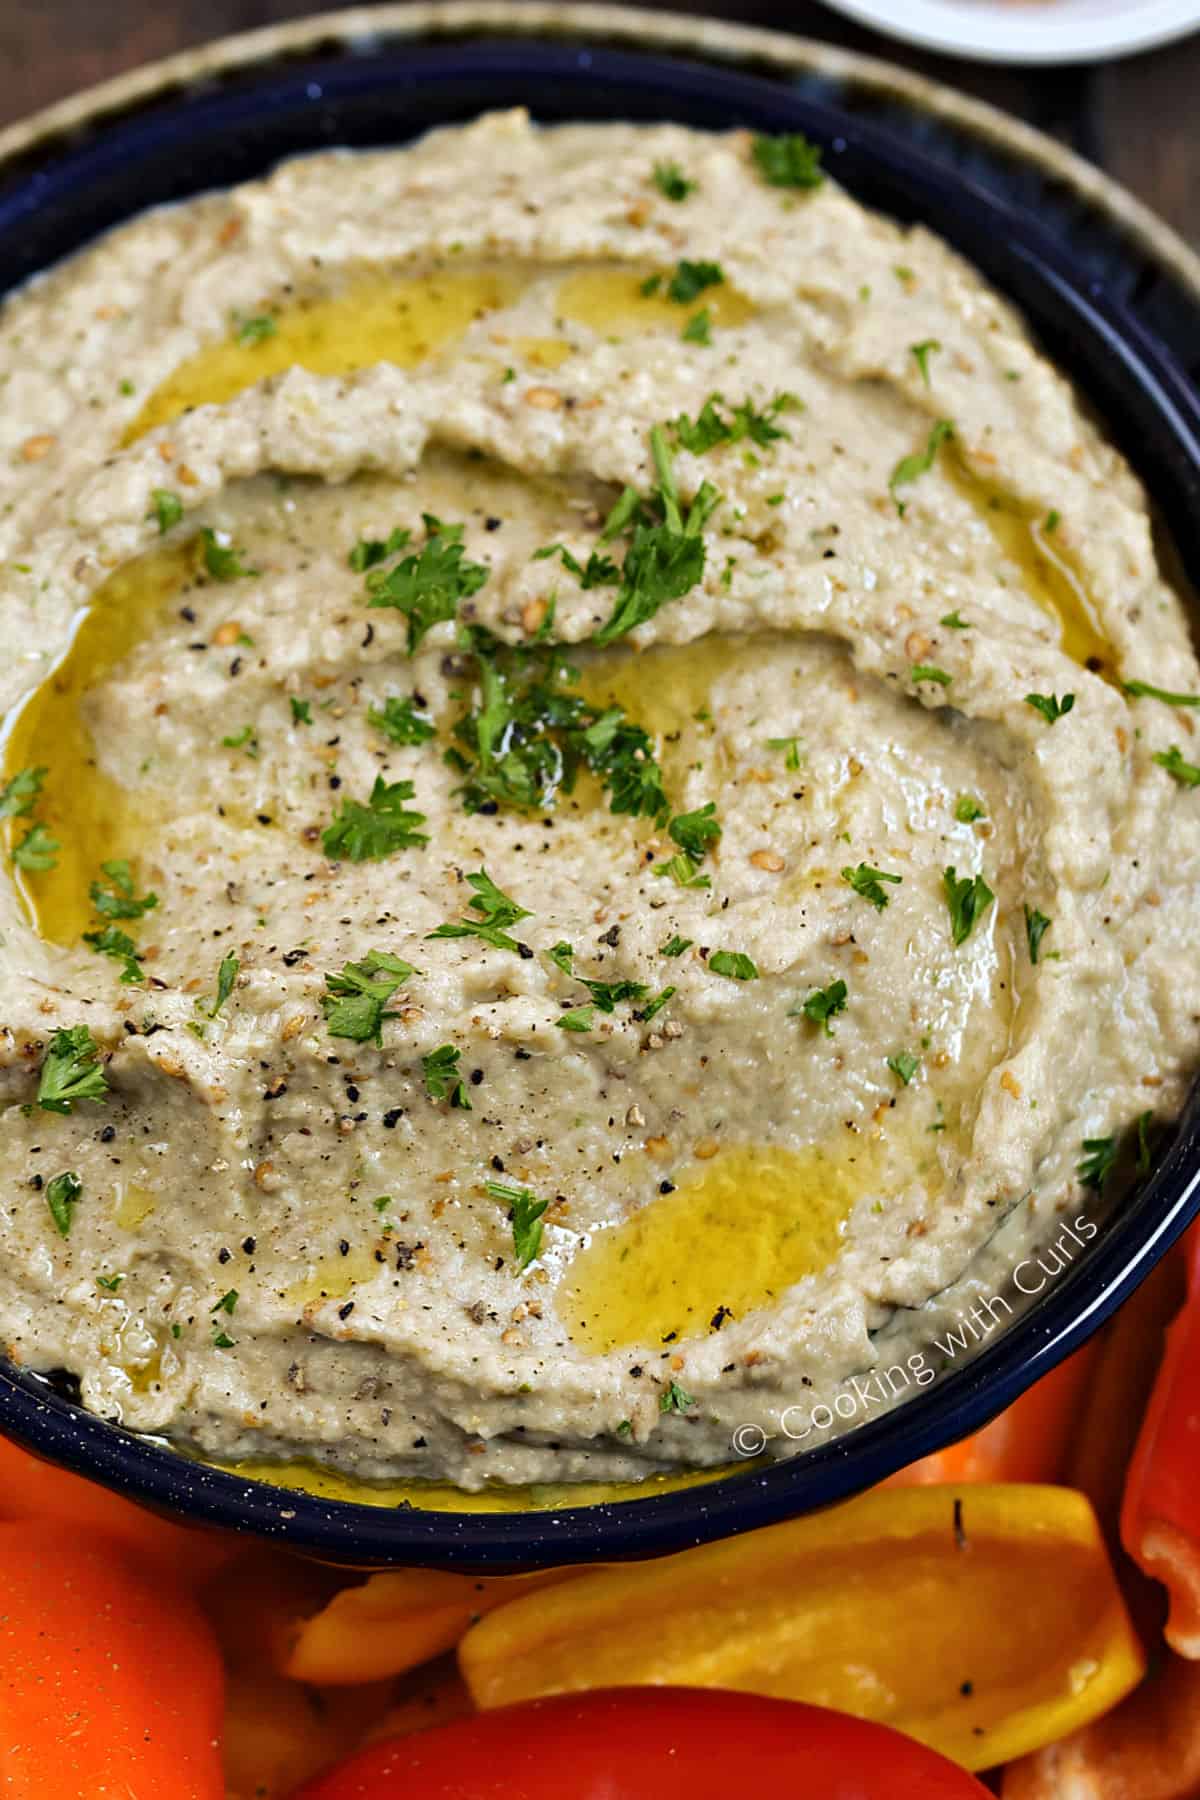 Looking down on a bowl of roasted Greek Eggplant Dip drizzled with olive oil and sprinkled with chopped parsley on a platter filled with sliced bell pepper.